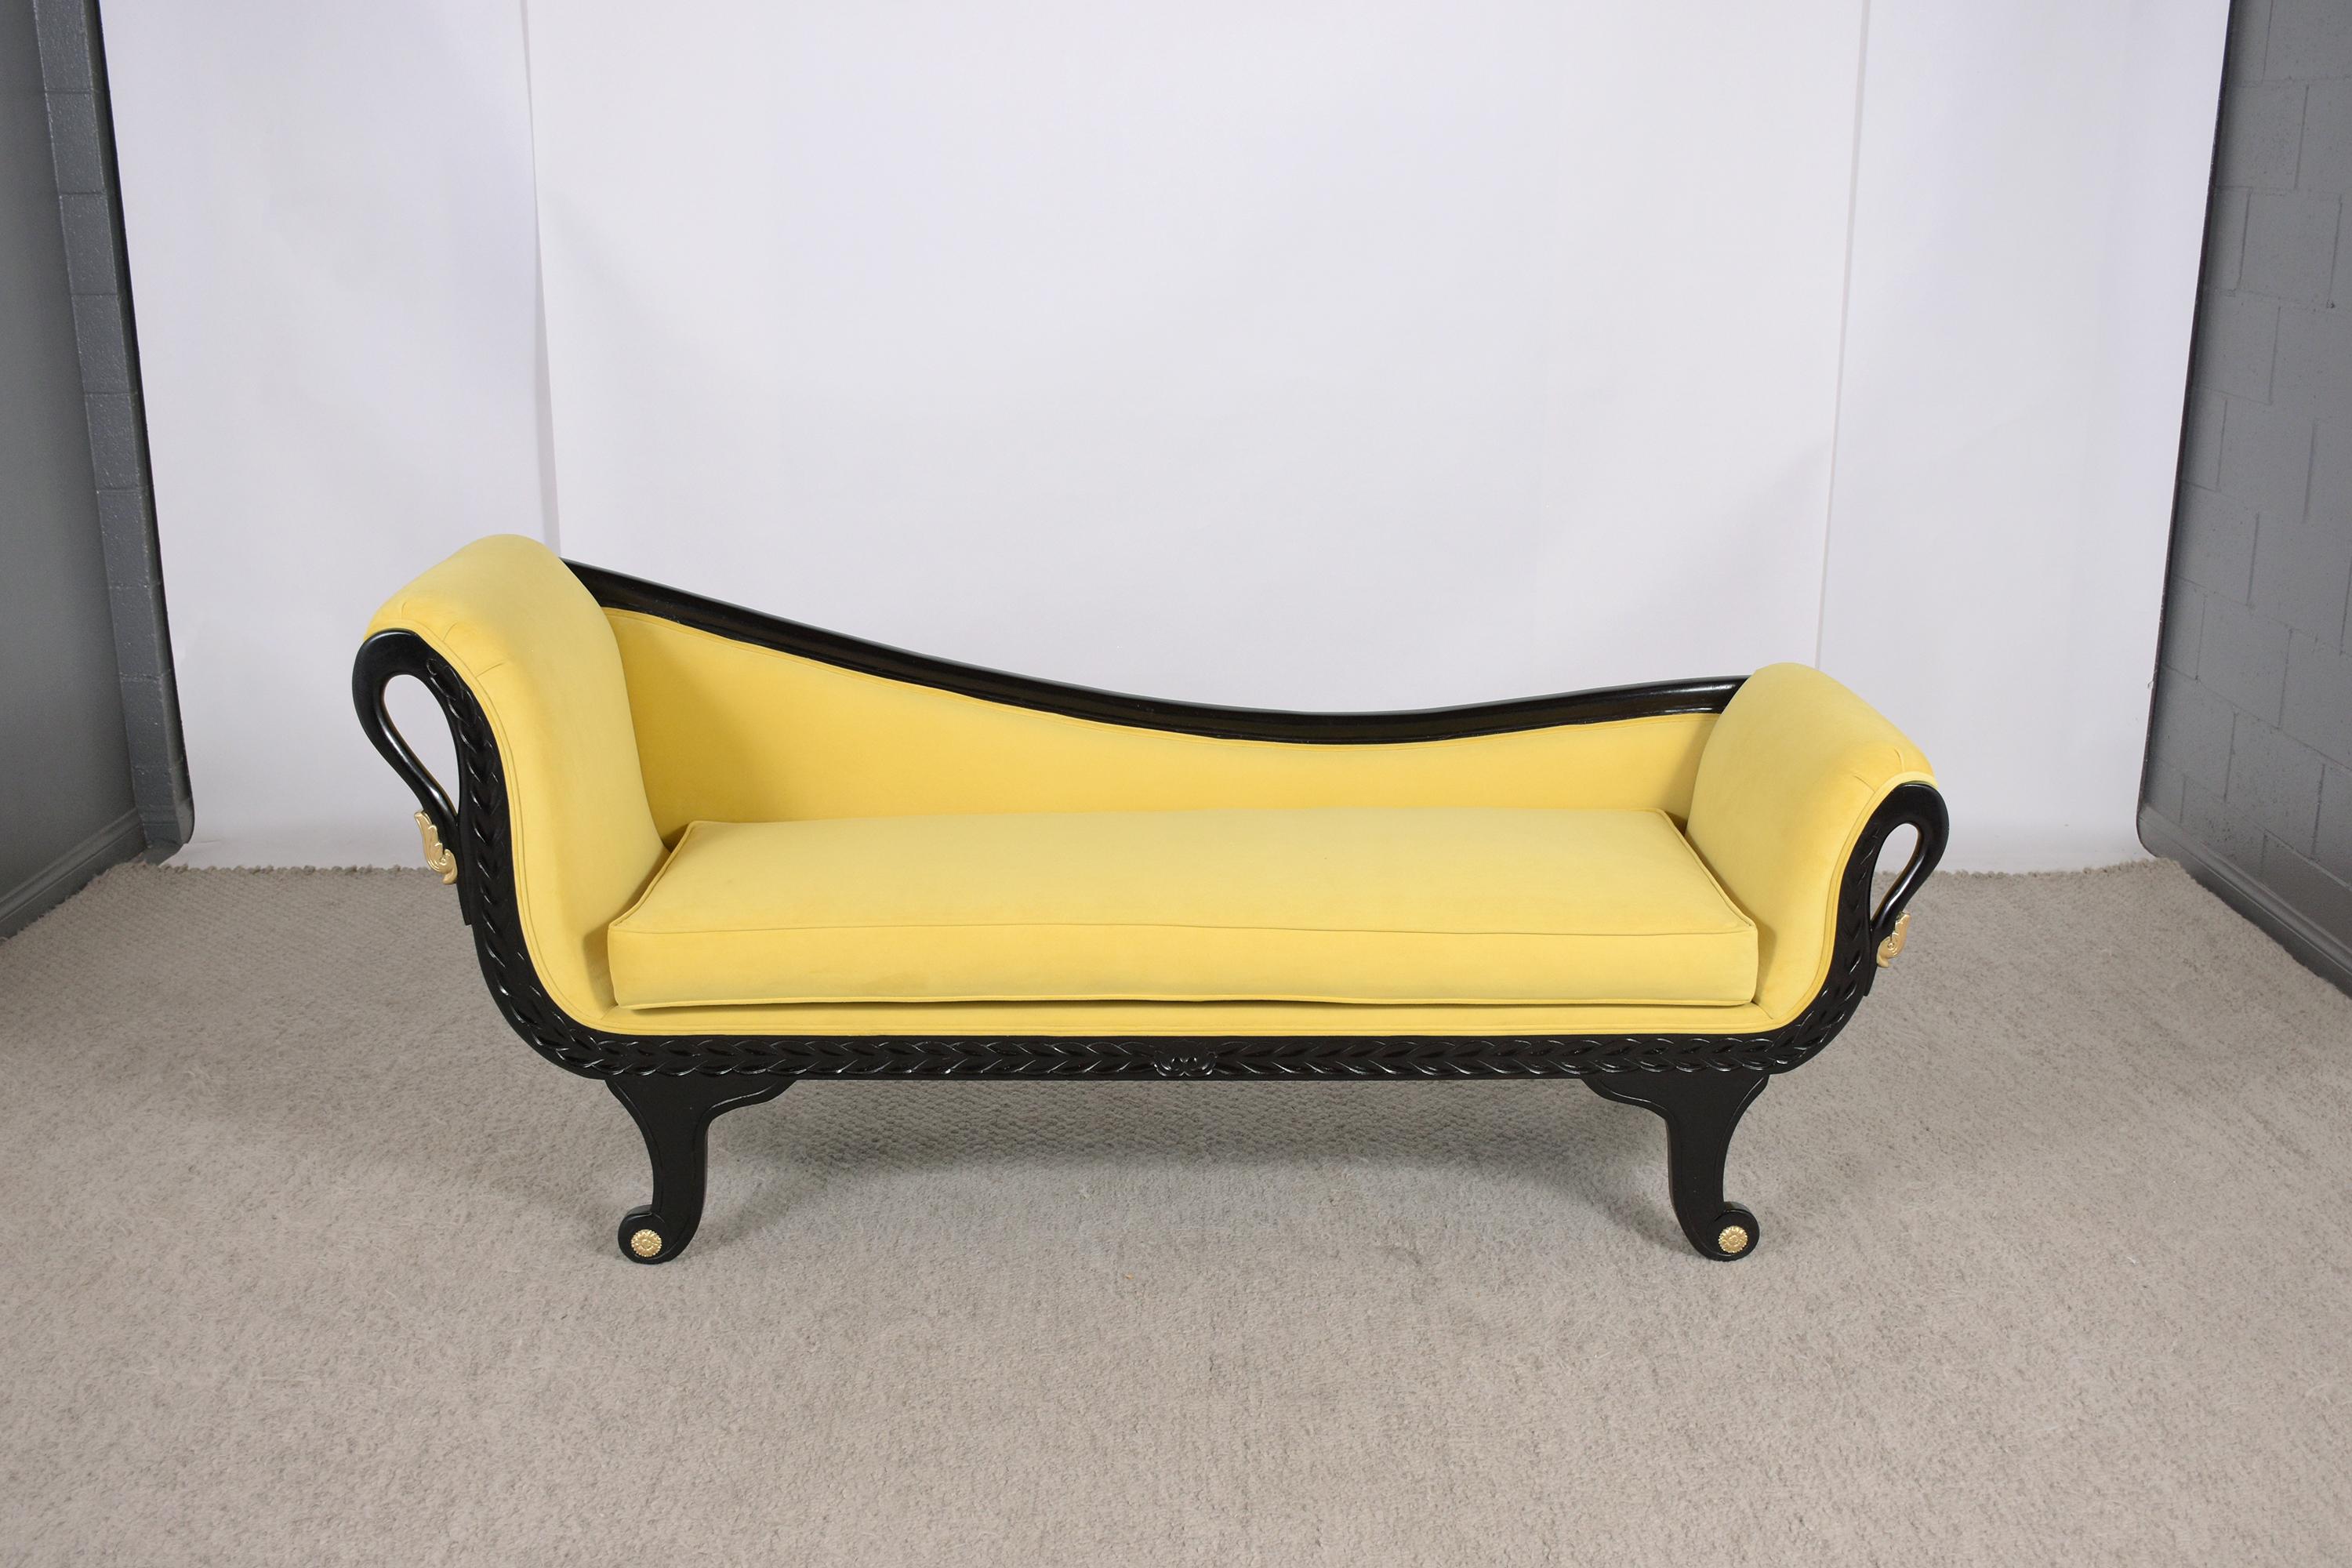 An elegant late vintage chaise lounge beautifully crafted out of mahogany wood professionally restored by our craftsmen team in-house. This fabulous piece features a beautiful ebonized finish, carved scrolled legs & armrests design with gilt and